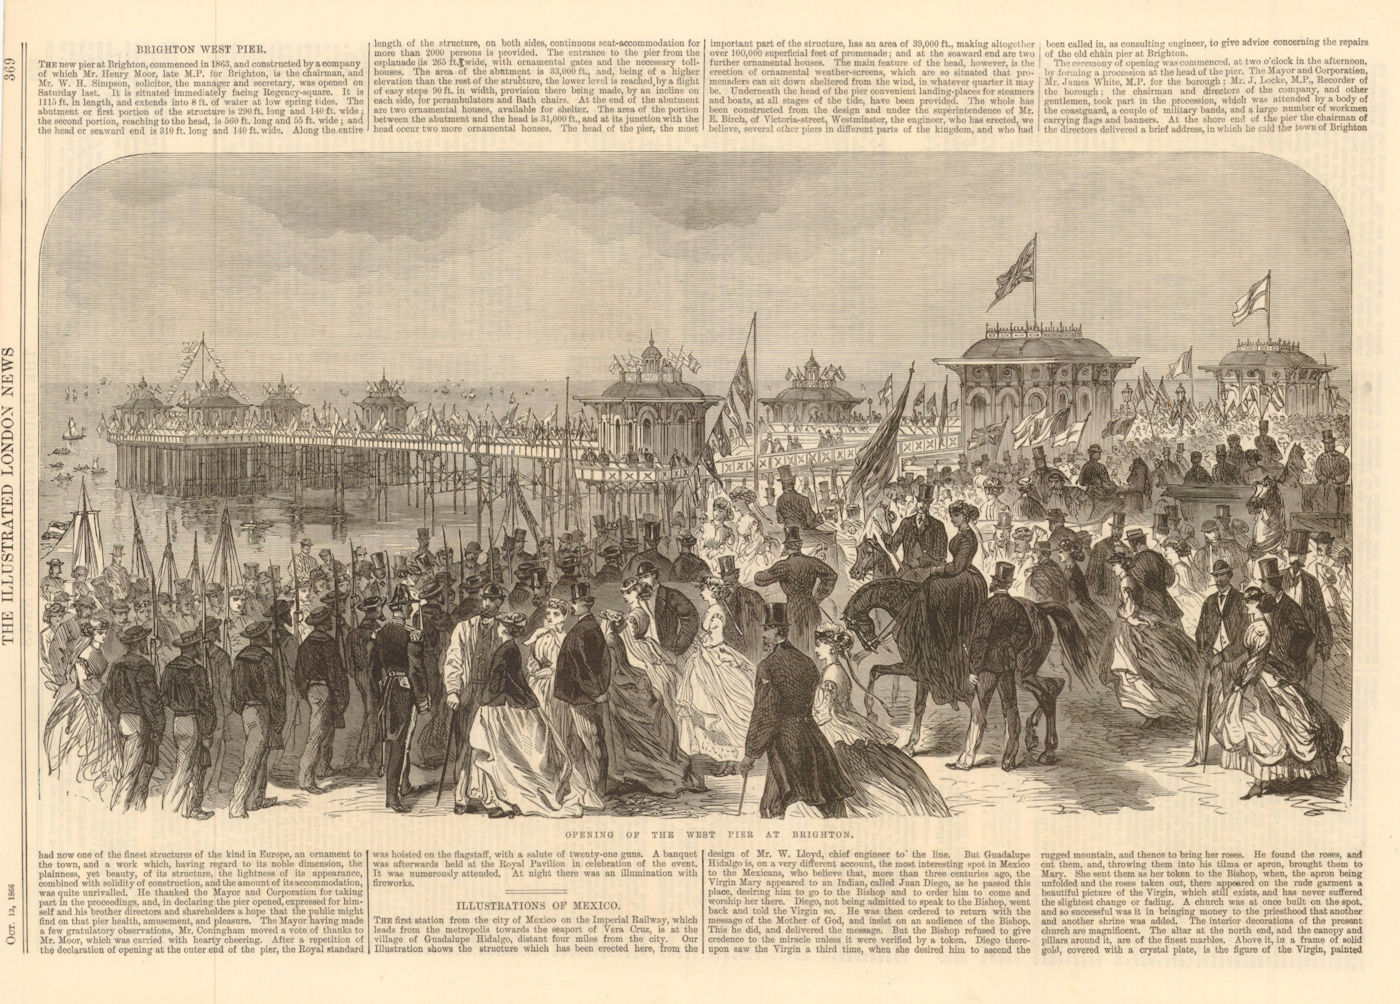 Associate Product Opening of the West Pier at Brighton. Sussex 1866 antique ILN full page print